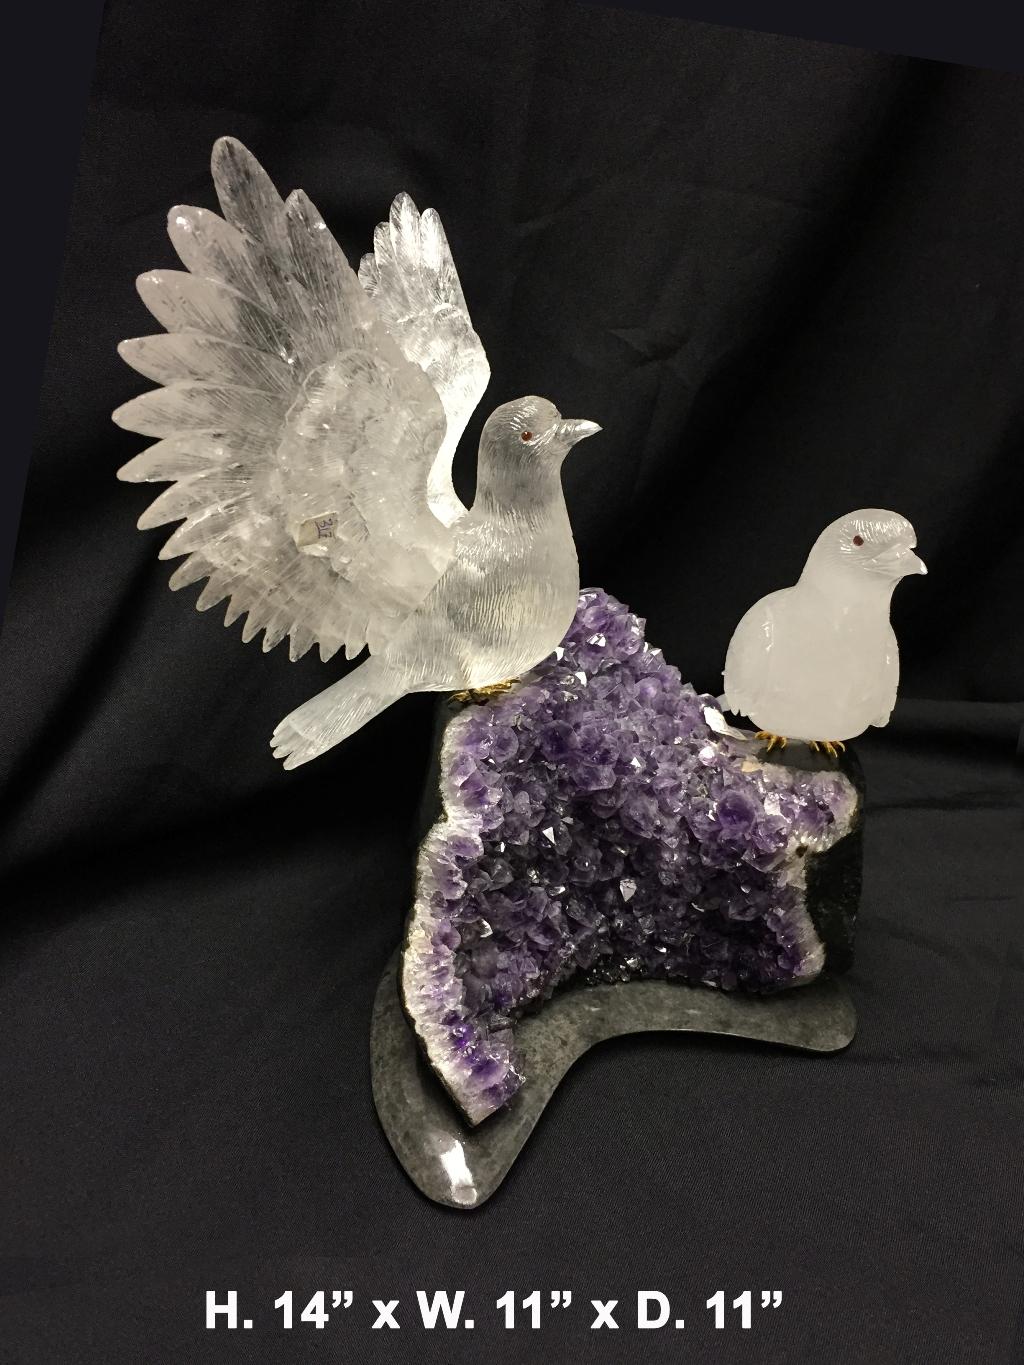 One of a kind Modern style Rock crystal bird group carved sculpture on Amethyst Quartz geode, one bird spreading it's wings and other resting on a natural open-face geode, all raised on a conforming marble base. 
Meticulous attention was given to